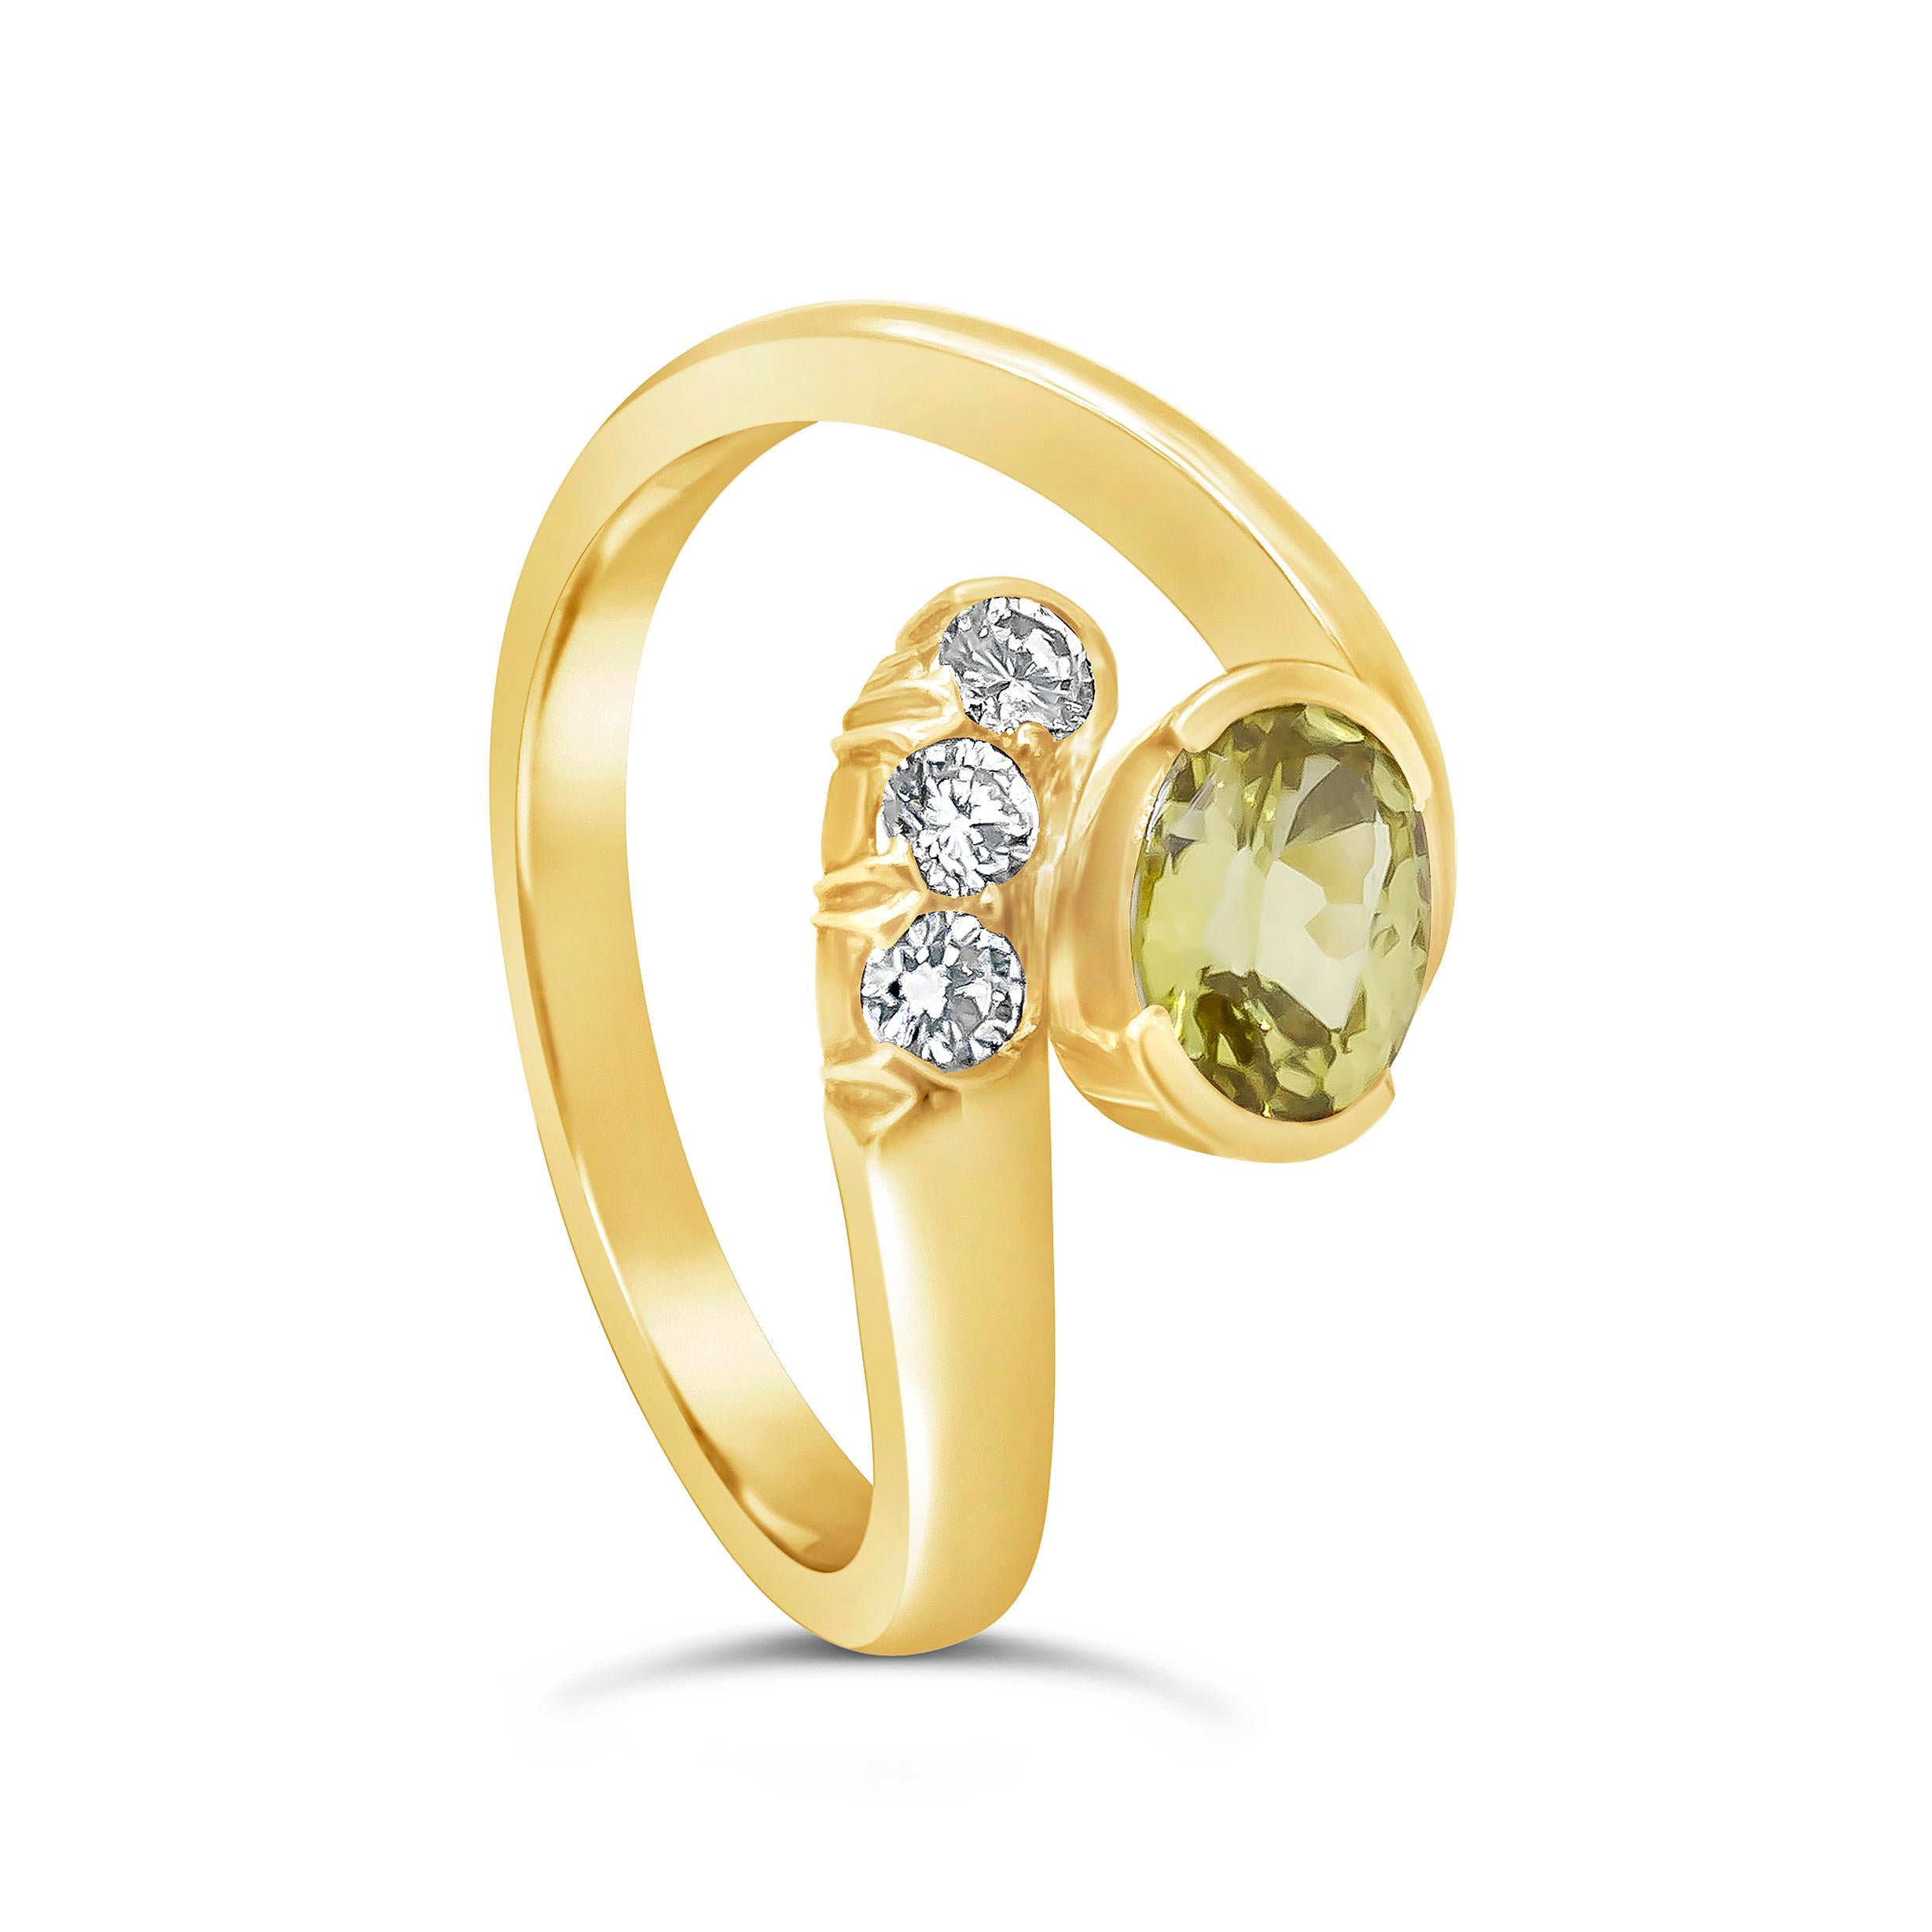 Showcasing a gorgeous 0.95 carat oval cut no heat yellow sapphire, accented with three round brilliant diamonds. Set in a bypass setting made in 18 karat yellow gold.

Style available in different price ranges. Prices are based on your selection.